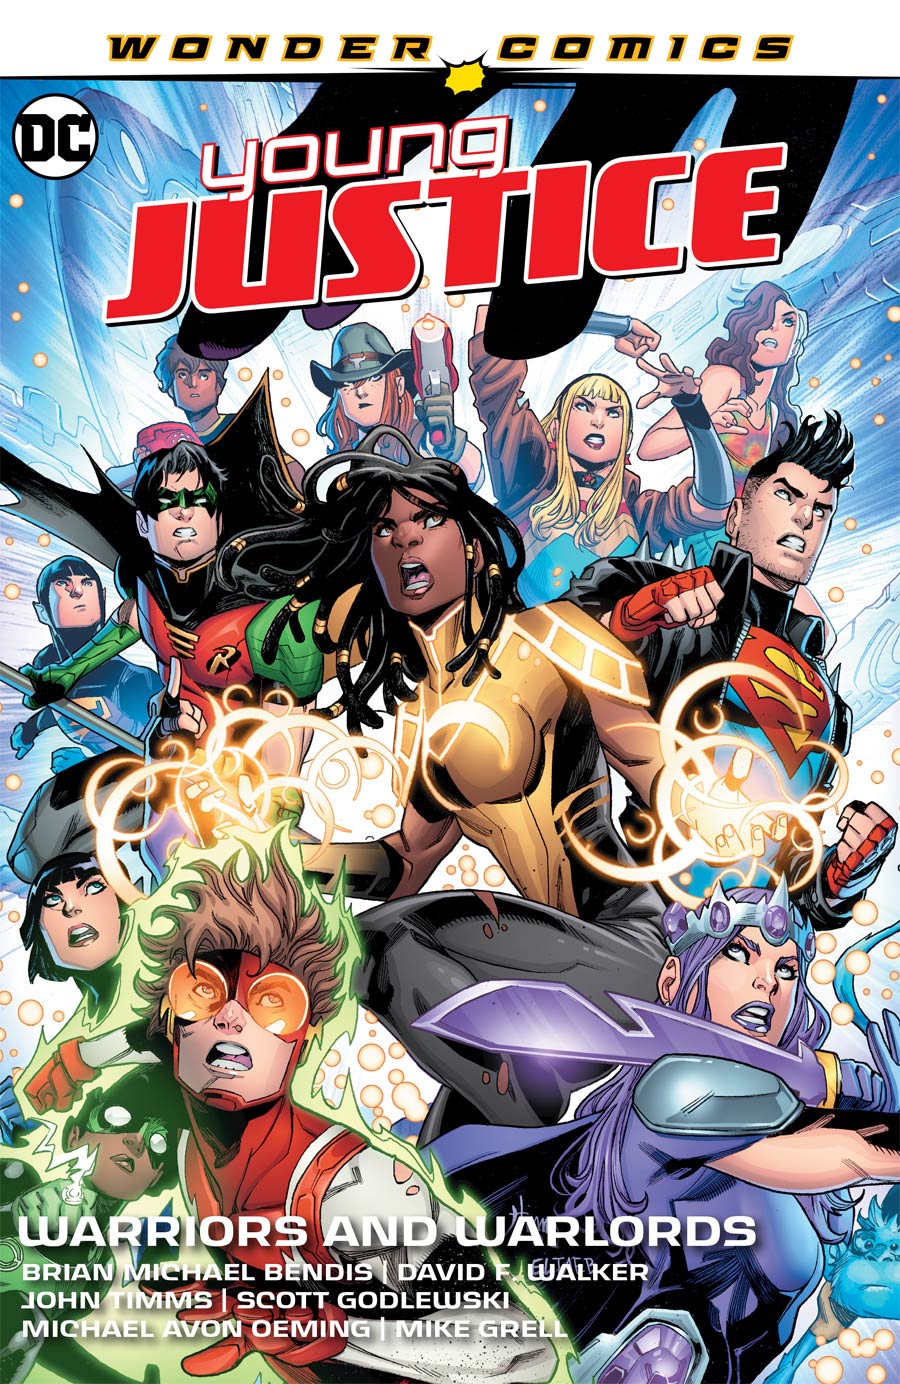 Young Justice (2019) Vol 3 Warriors And Warlords TP